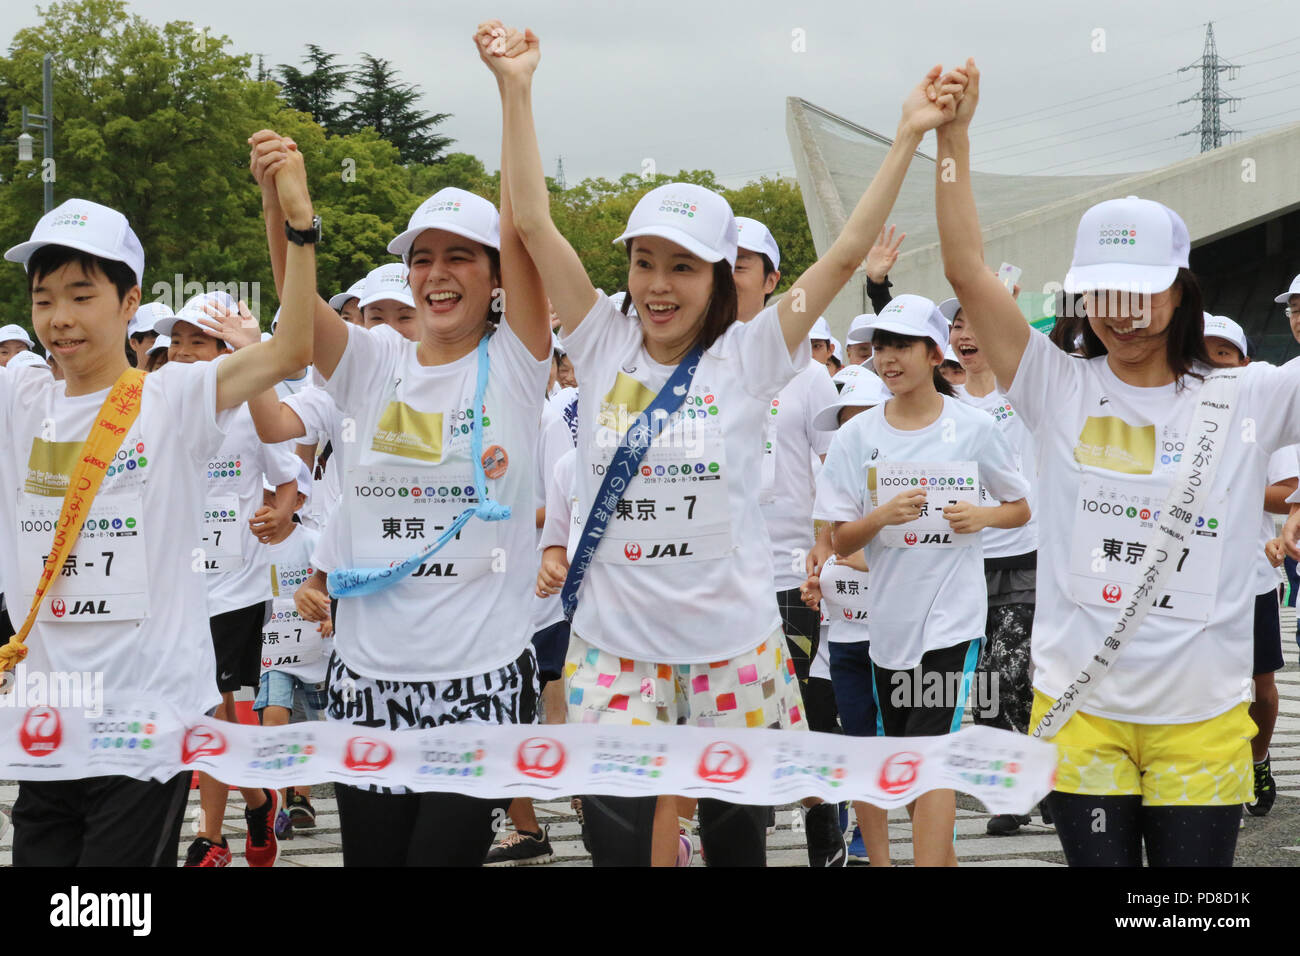 Tokyo, Japan. 7th Aug, 2018. Barcelona Olympics swimming gold medalist Kyoko Iwasaki(R), marathon runner Masako Chiba (2nd R) and TV personality Suzanne (2nd L) cross the finish line for the '1,000km relay to Tokyo' at the Komazawa stadium in Tokyo on Tuesday, August 7, 2018. Some 1,600 runners participated the marathon relay from Aomori to Tokyo for the commemoration of the 3.11 East Japan Great Earthquake. Credit: Yoshio Tsunoda/AFLO/Alamy Live News Stock Photo